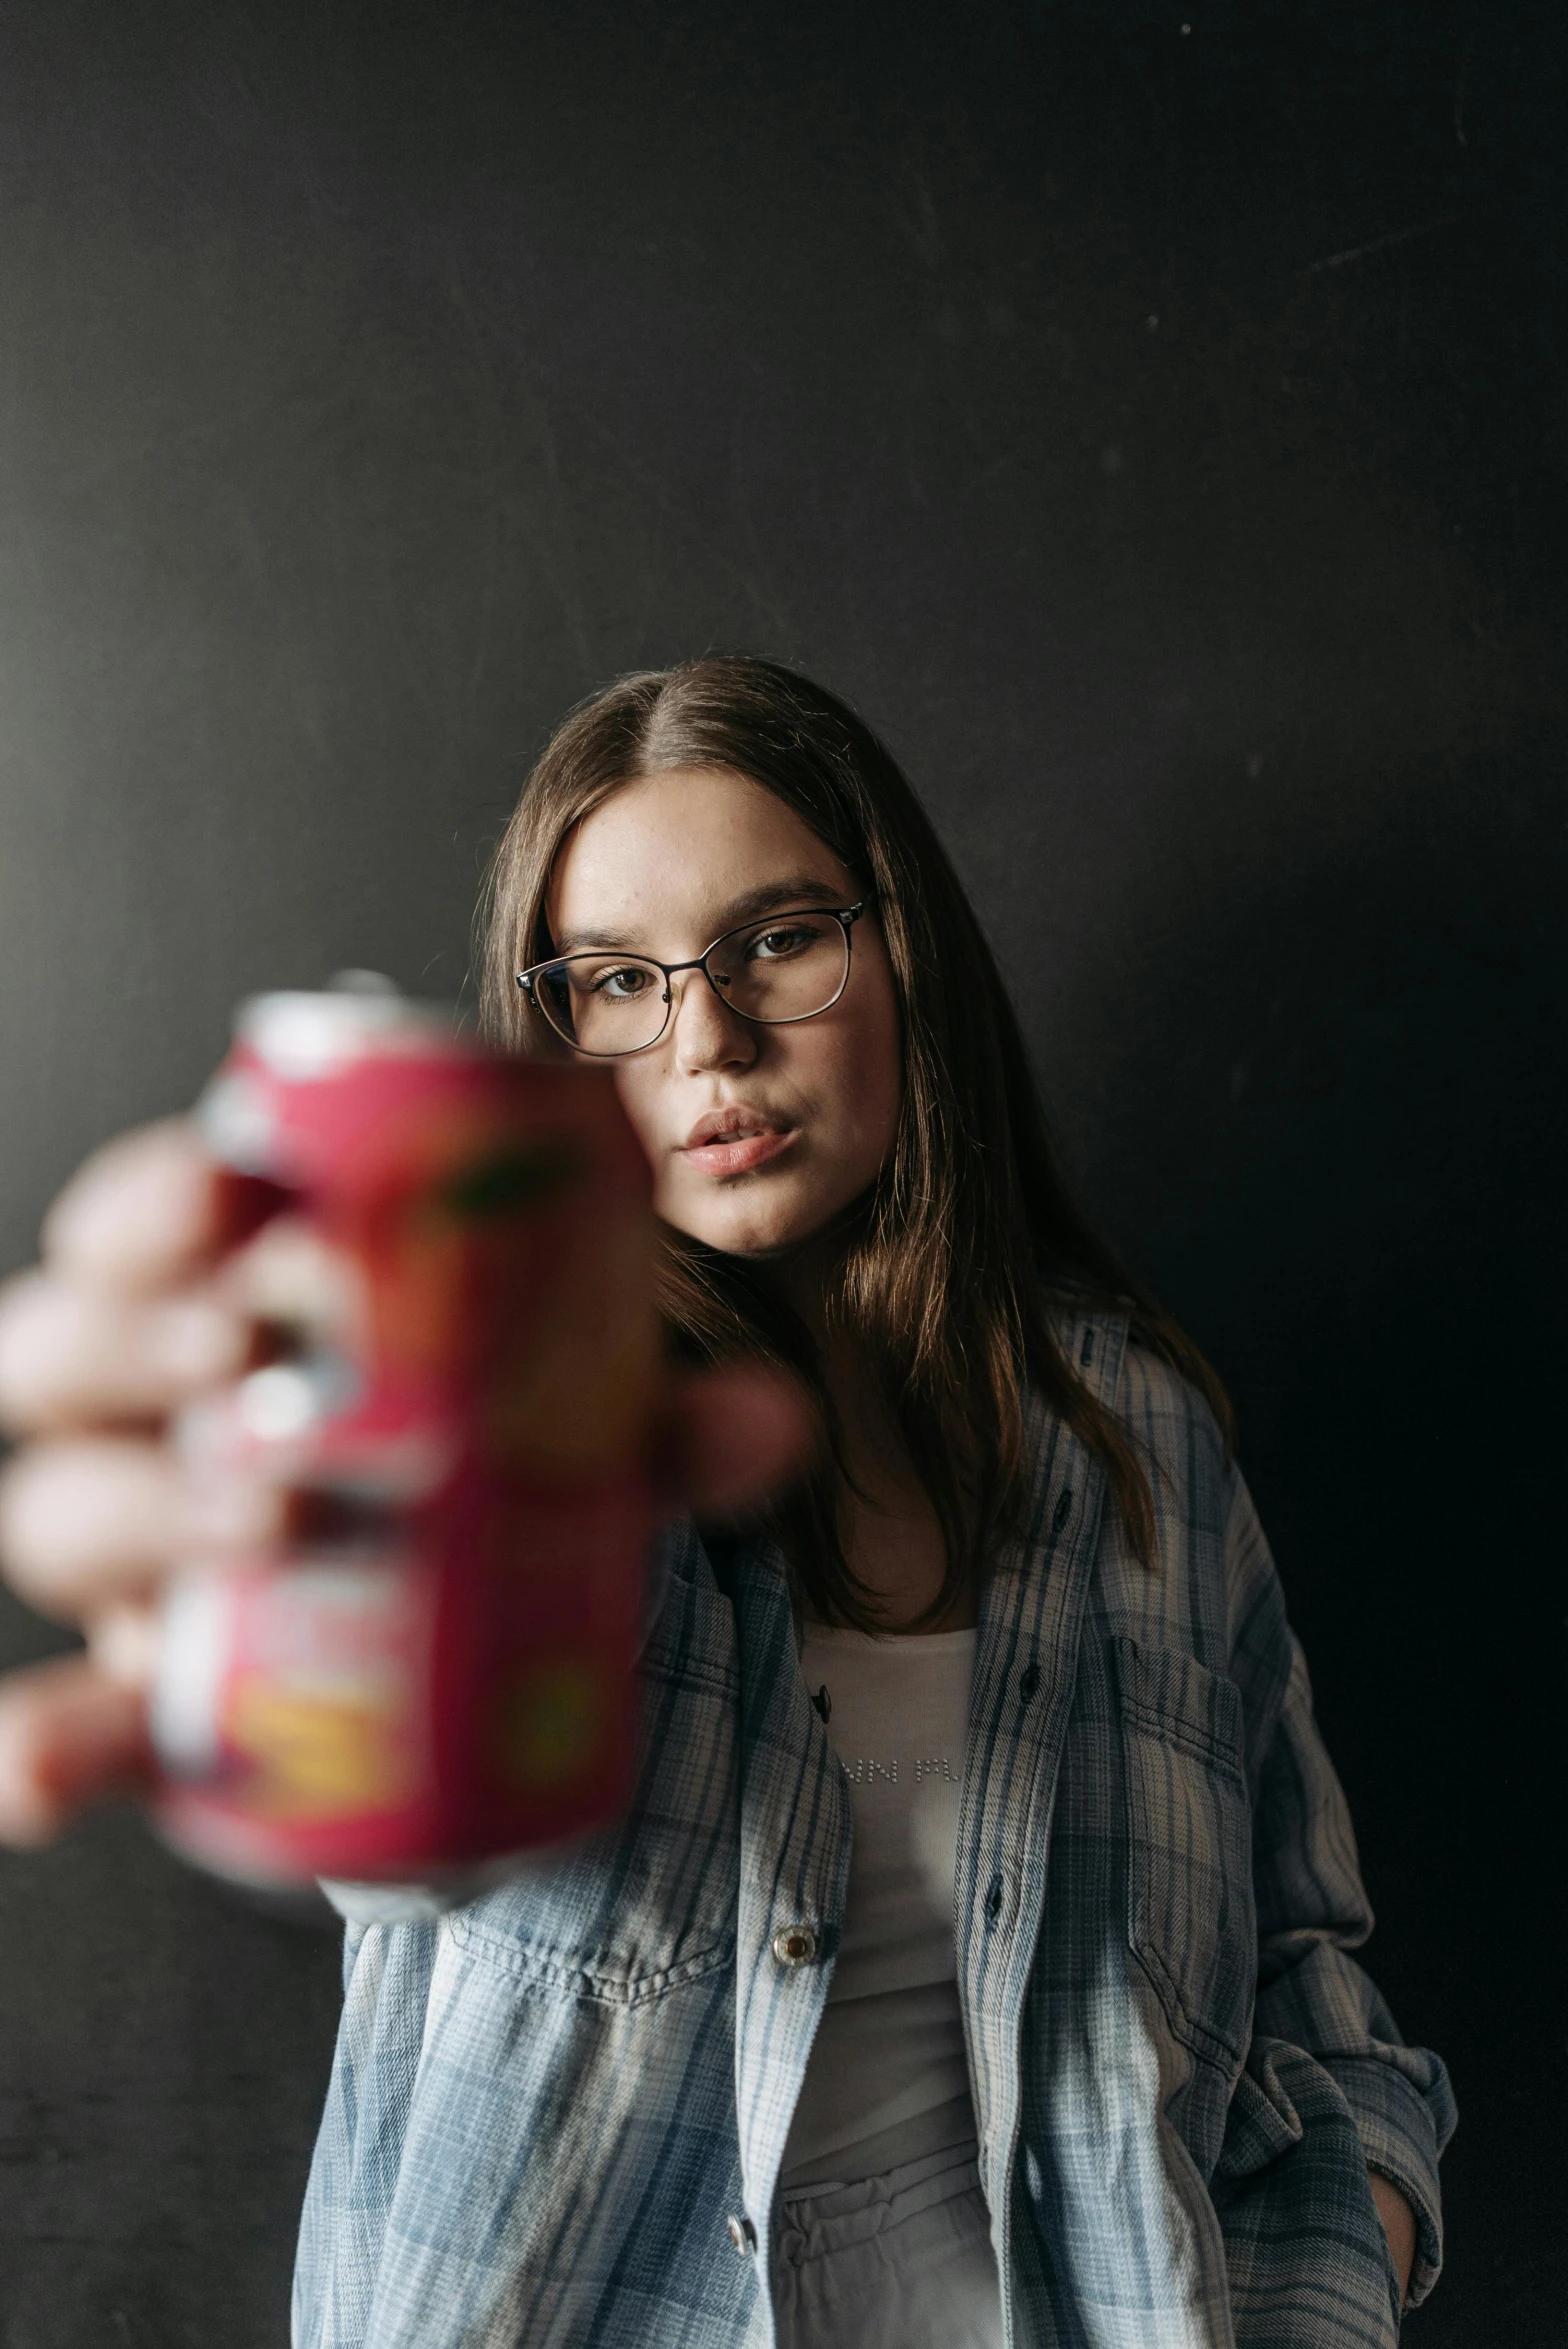 the woman is posing for the camera with a can of beer